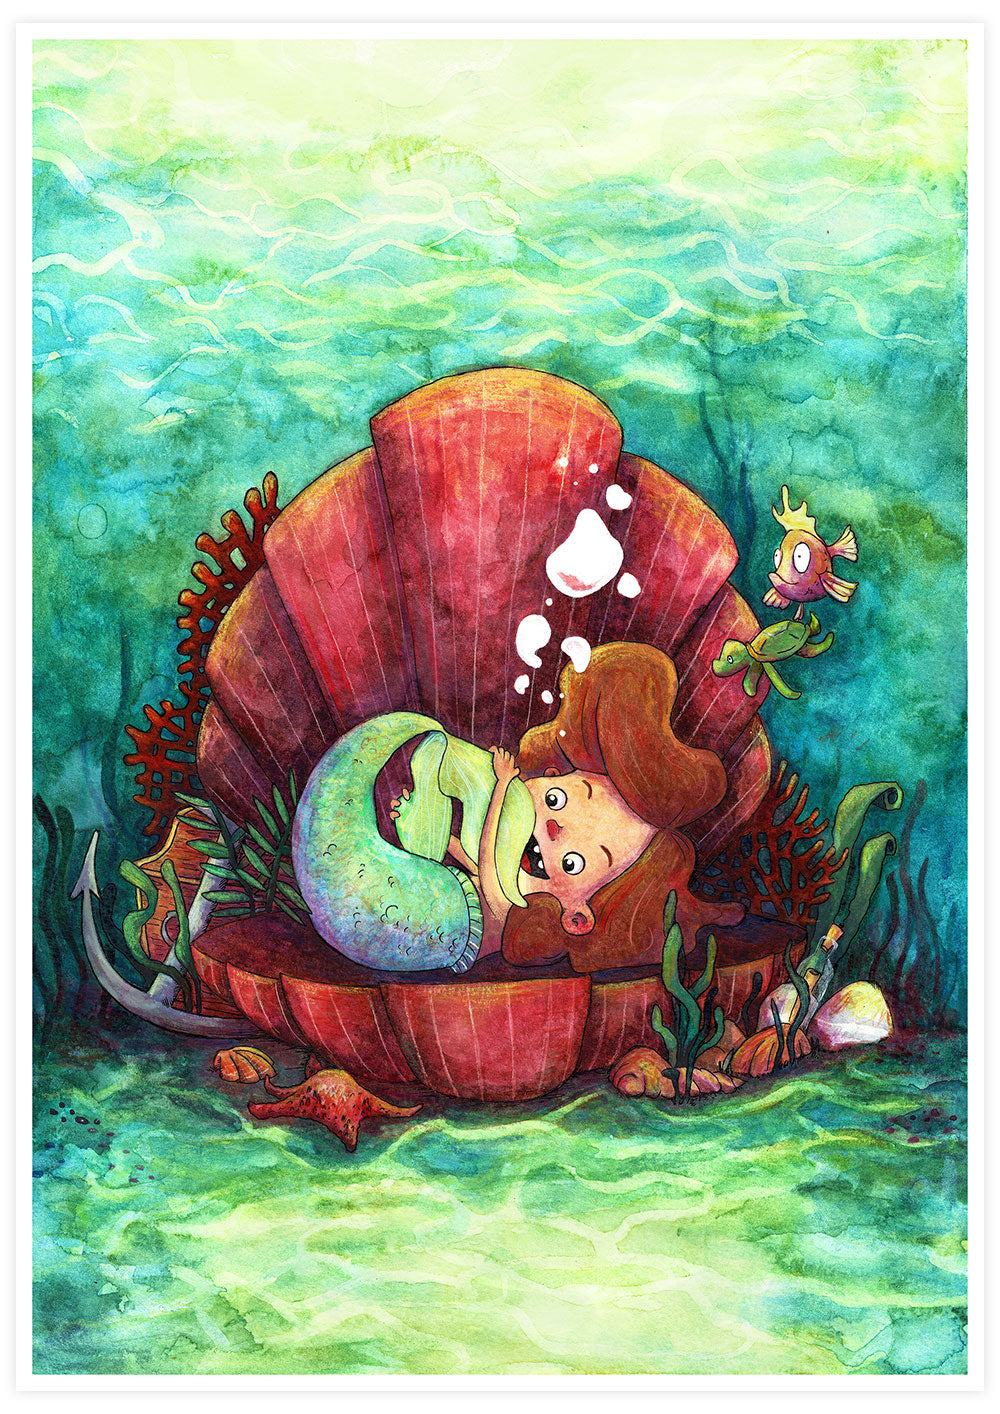 The Little-est Mermaid Art Print with bright red and green colour